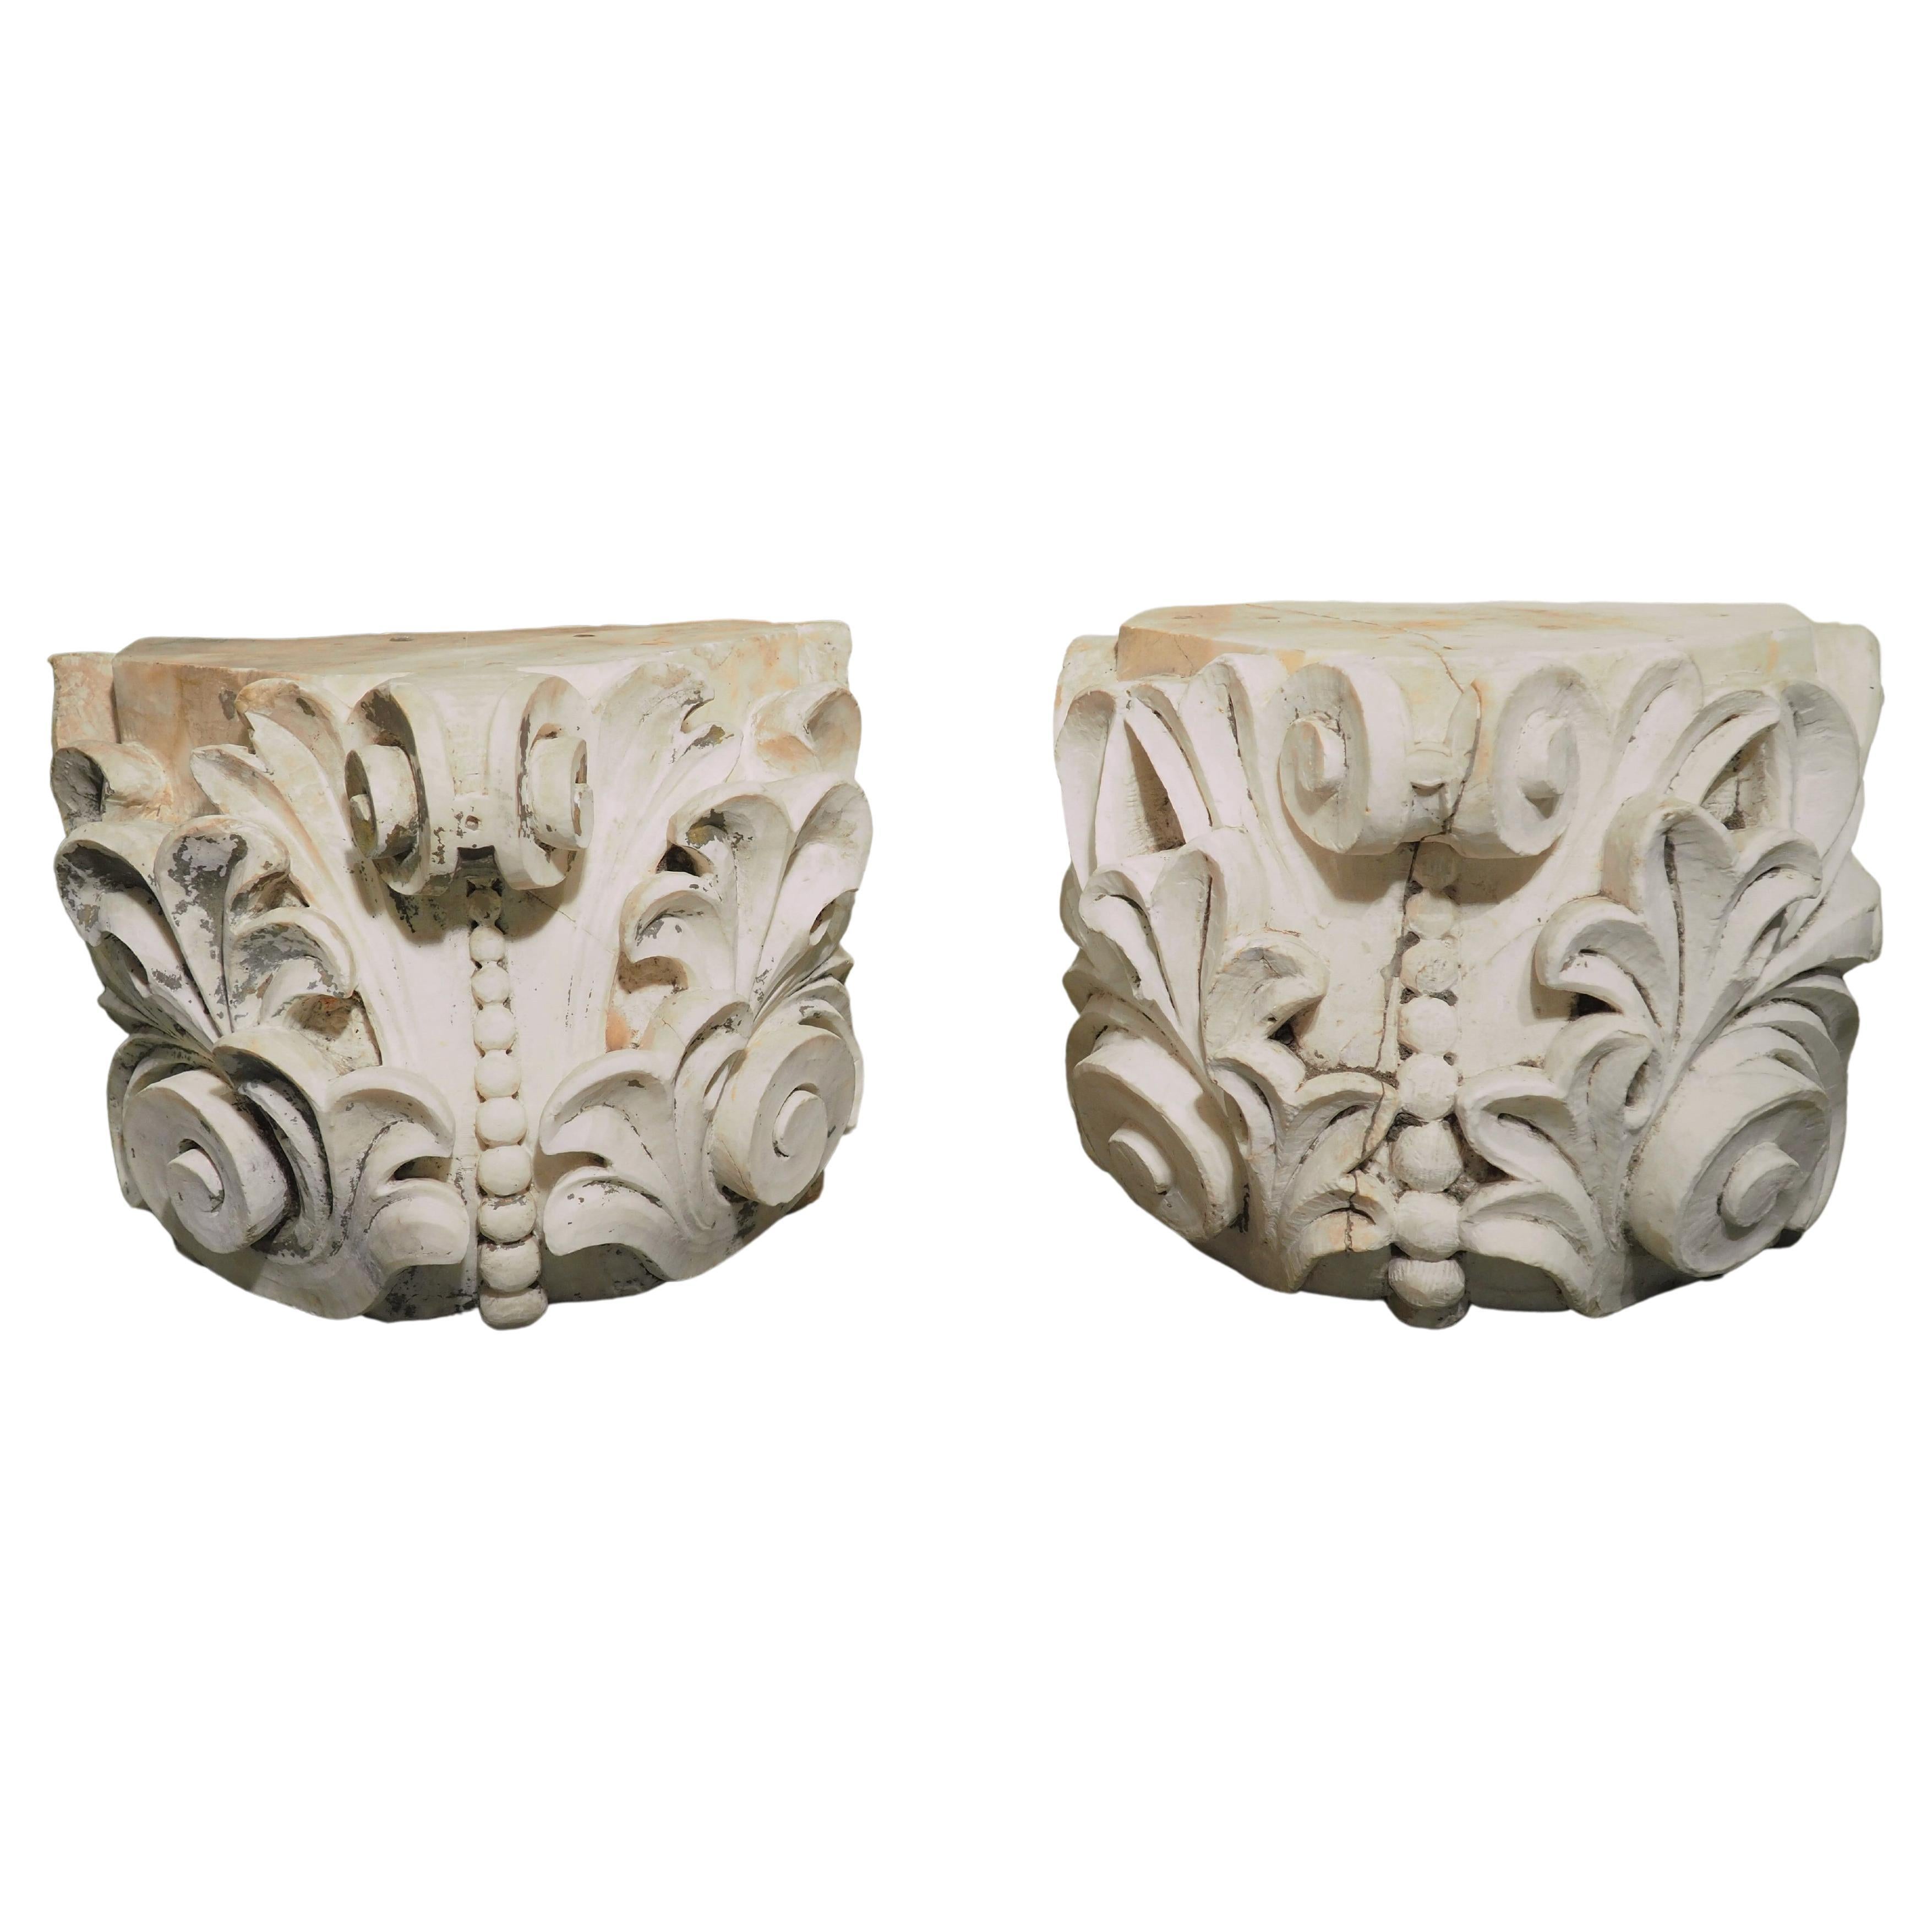 Pair of 18th Century Carved Marble Capitals from Italy